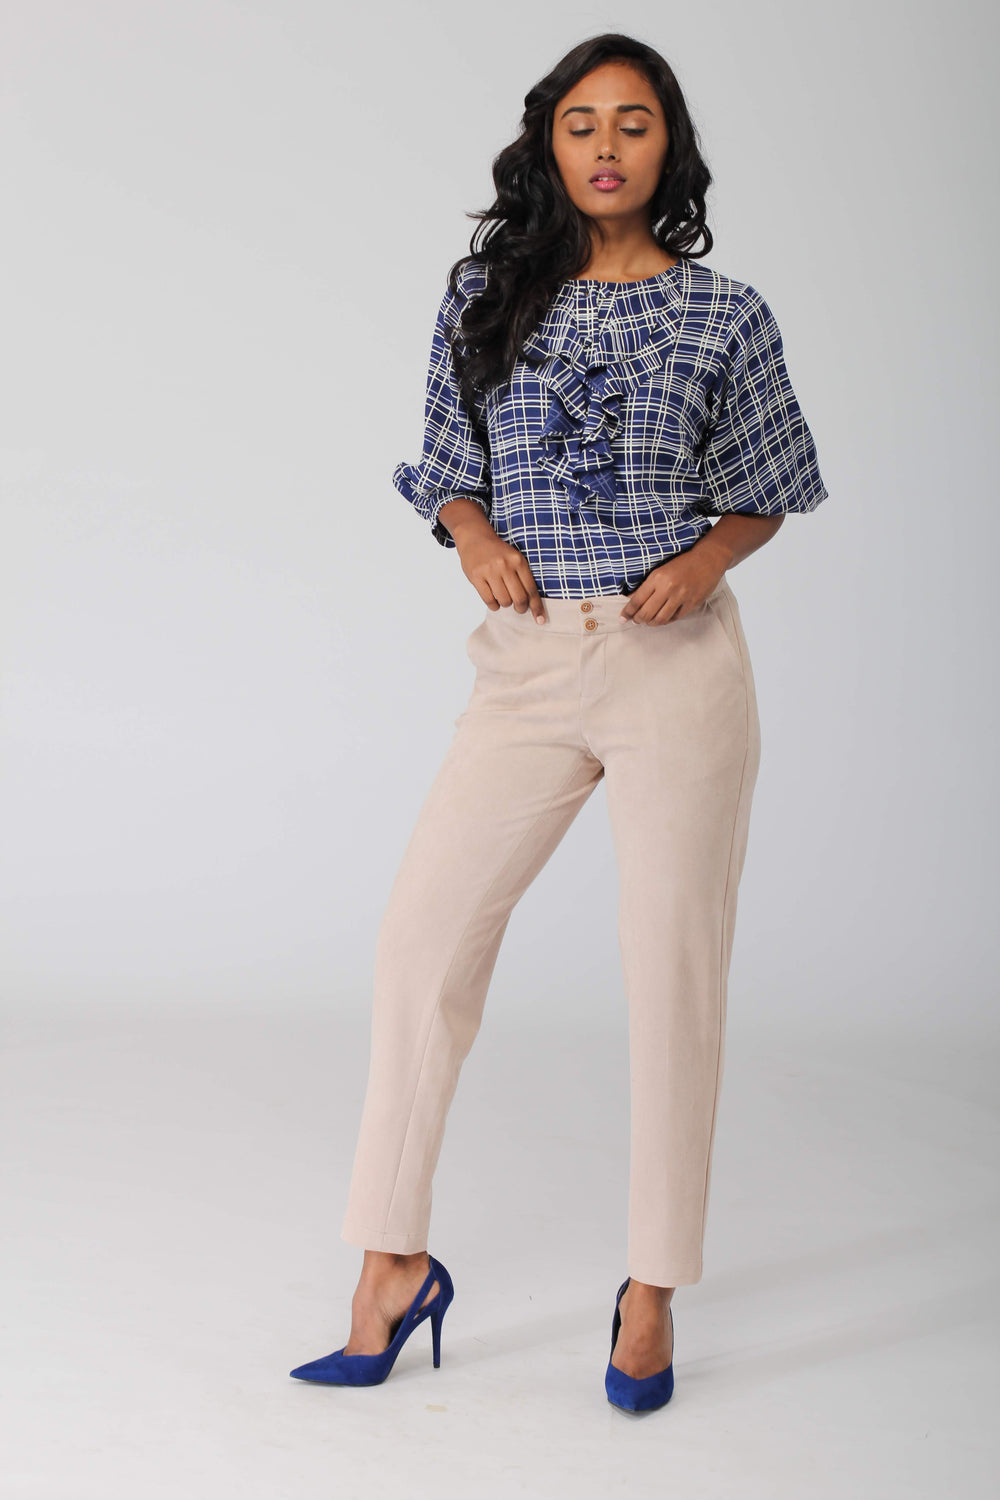 Albany Beige Stretchable Pants with twin buttons